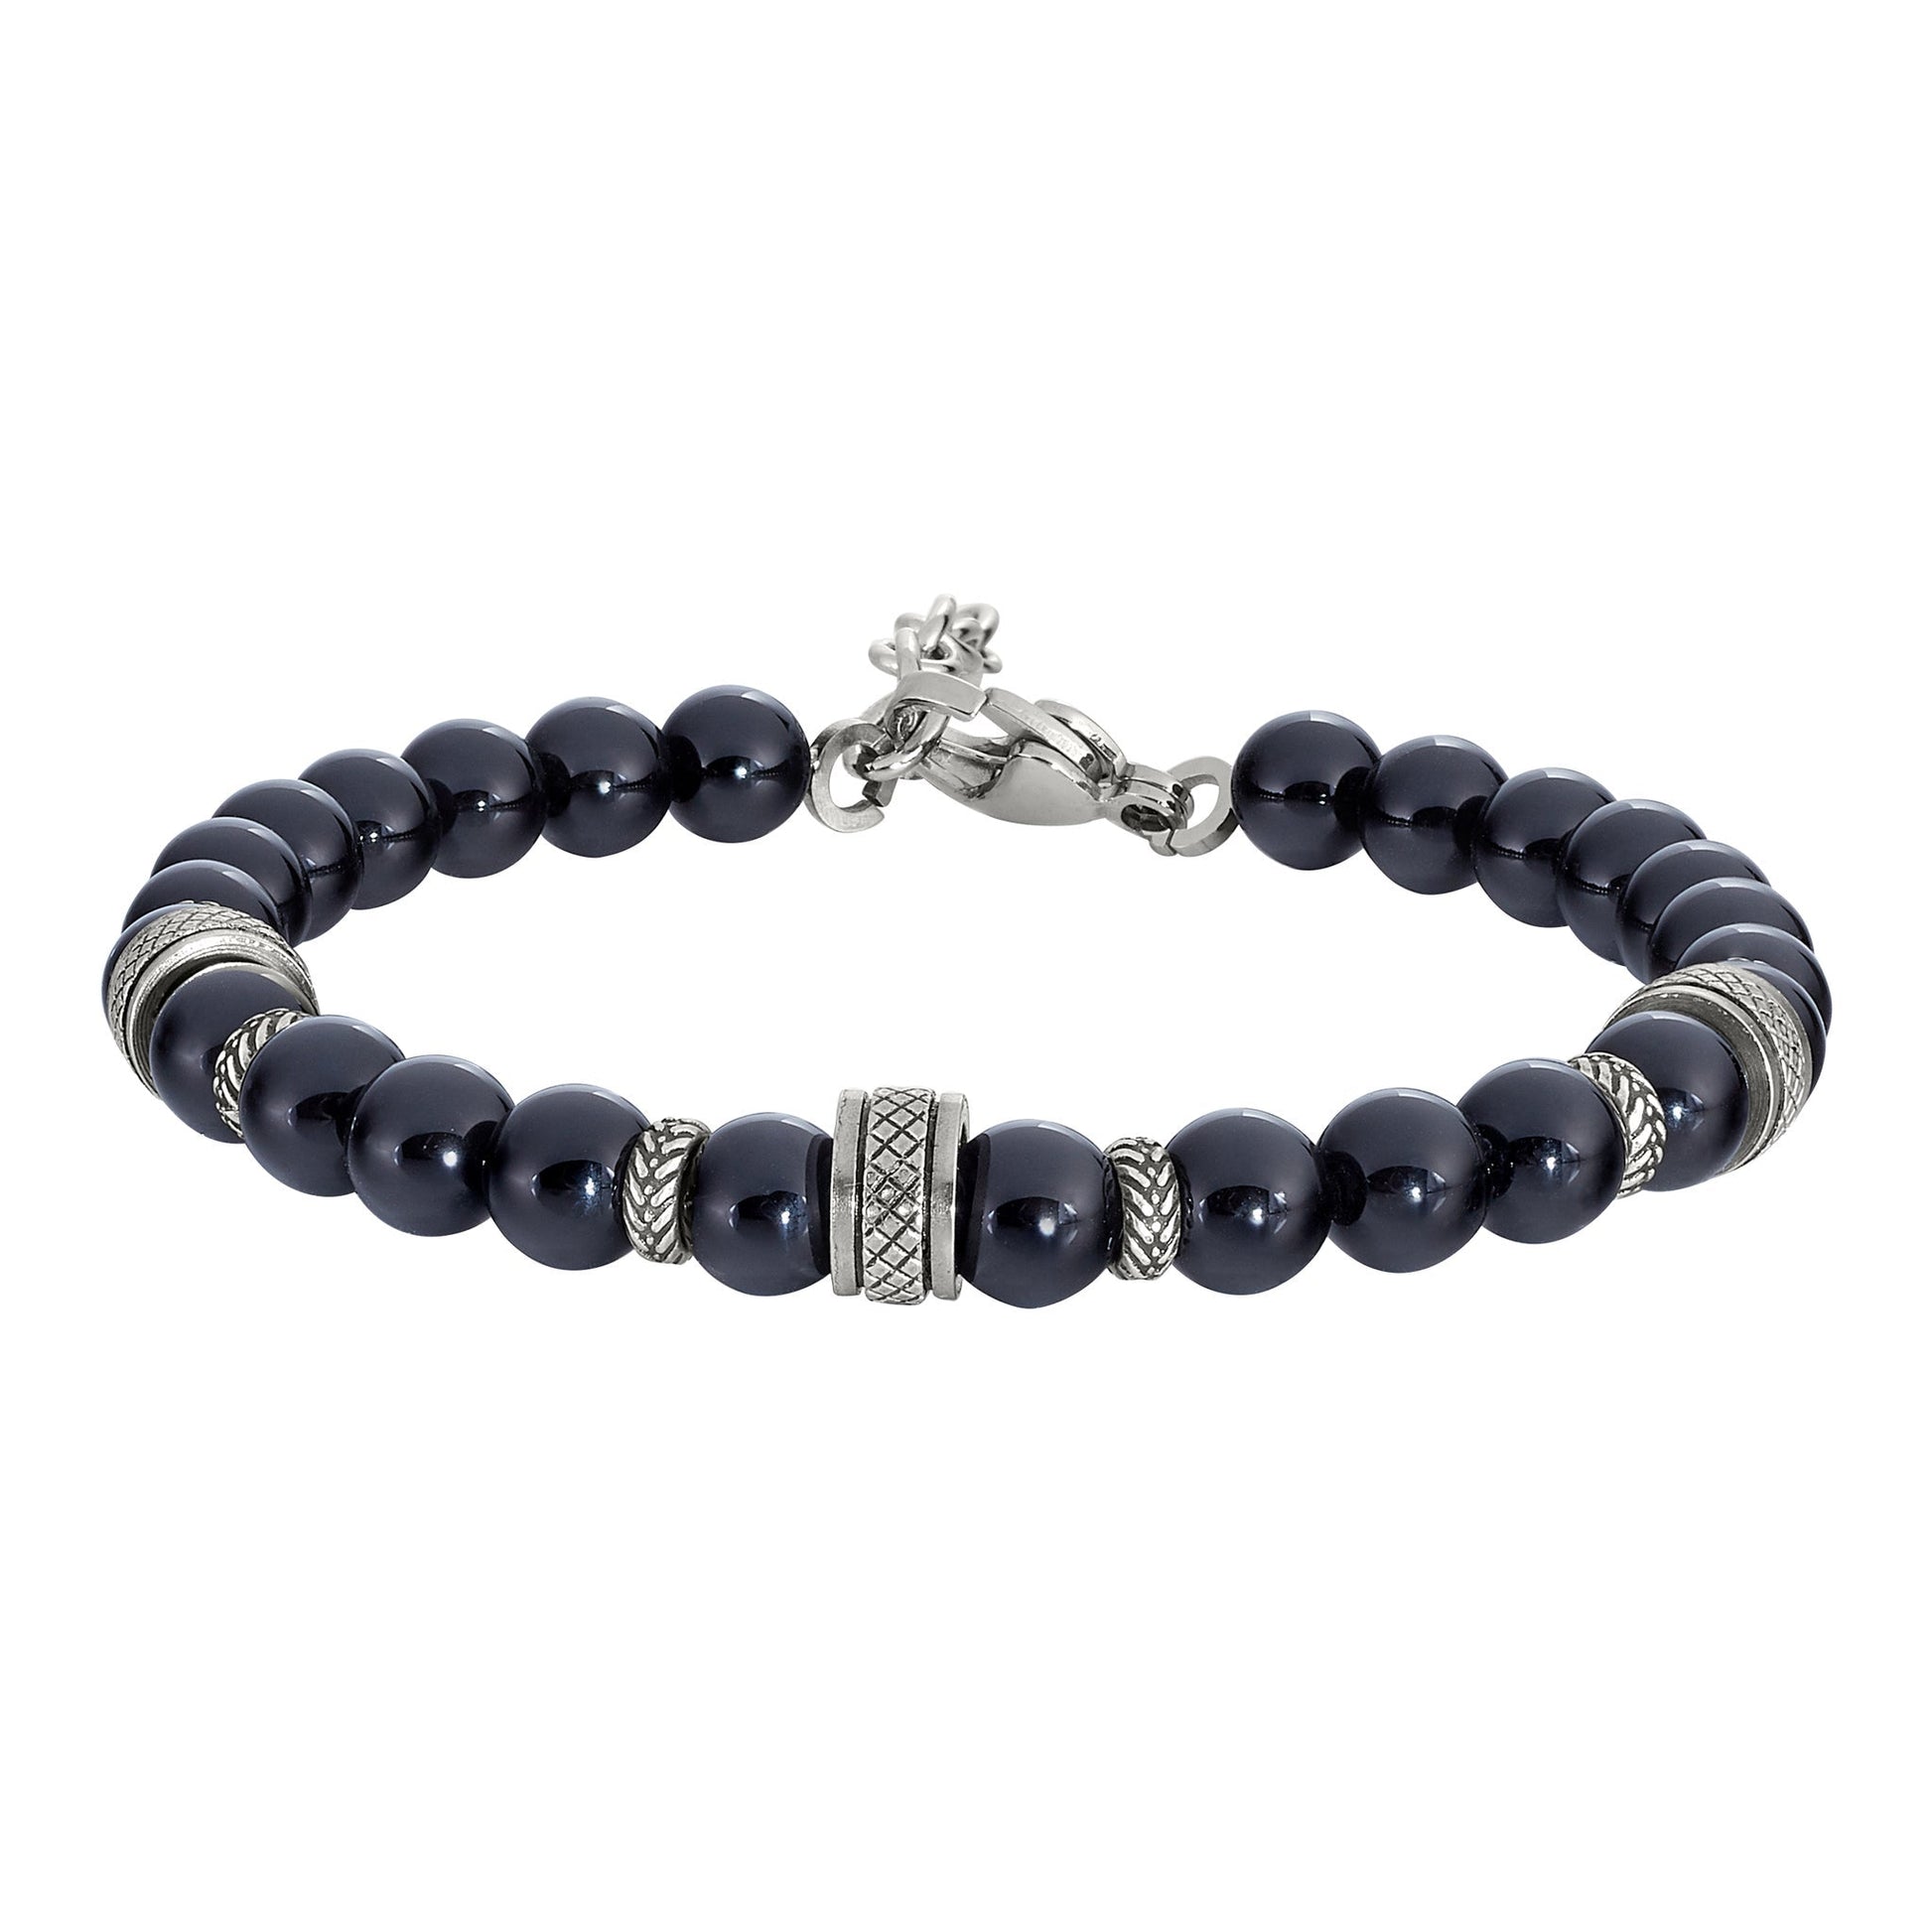 A black stone beaded bracelet with 3 stainless steel accents displayed on a neutral white background.